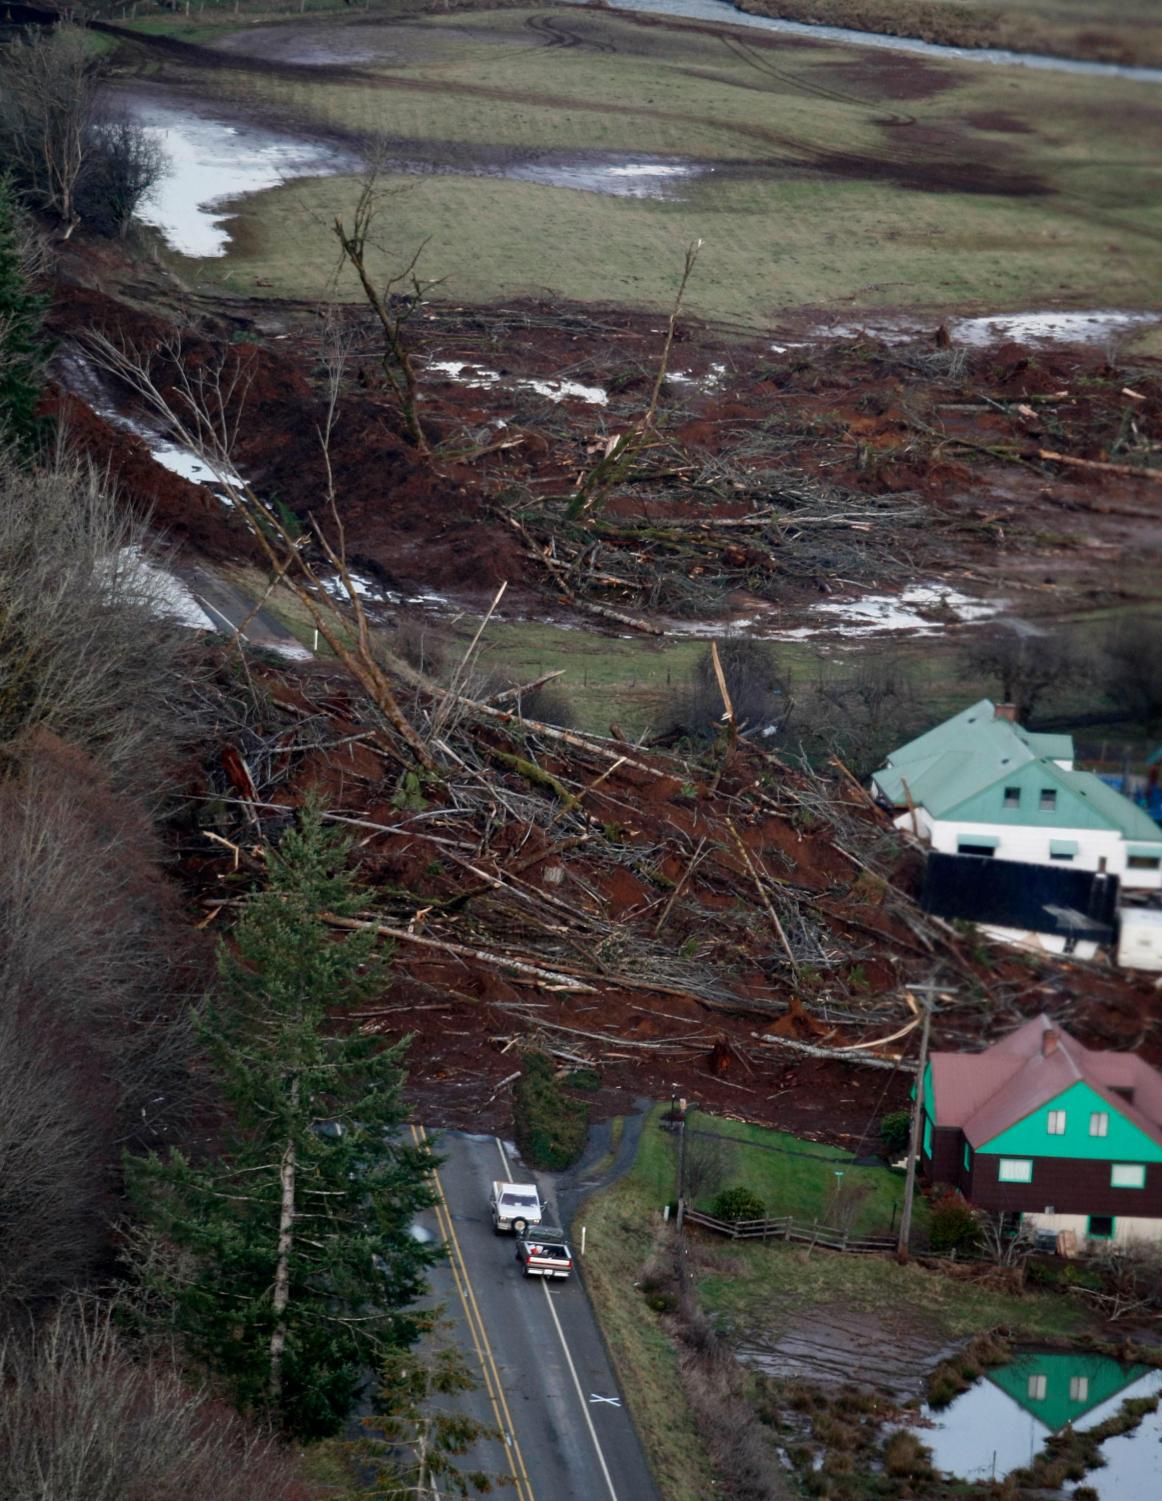 A slide over Hwy. 6 in Lewis County Wash., still blocks the road on Saturday, Dec. 8, 2007. Washington Gov. Chris Gregoire has requested federal disaster declaration for the two Washington counties that were hit by hardest by storms and flooding earlier in the week.